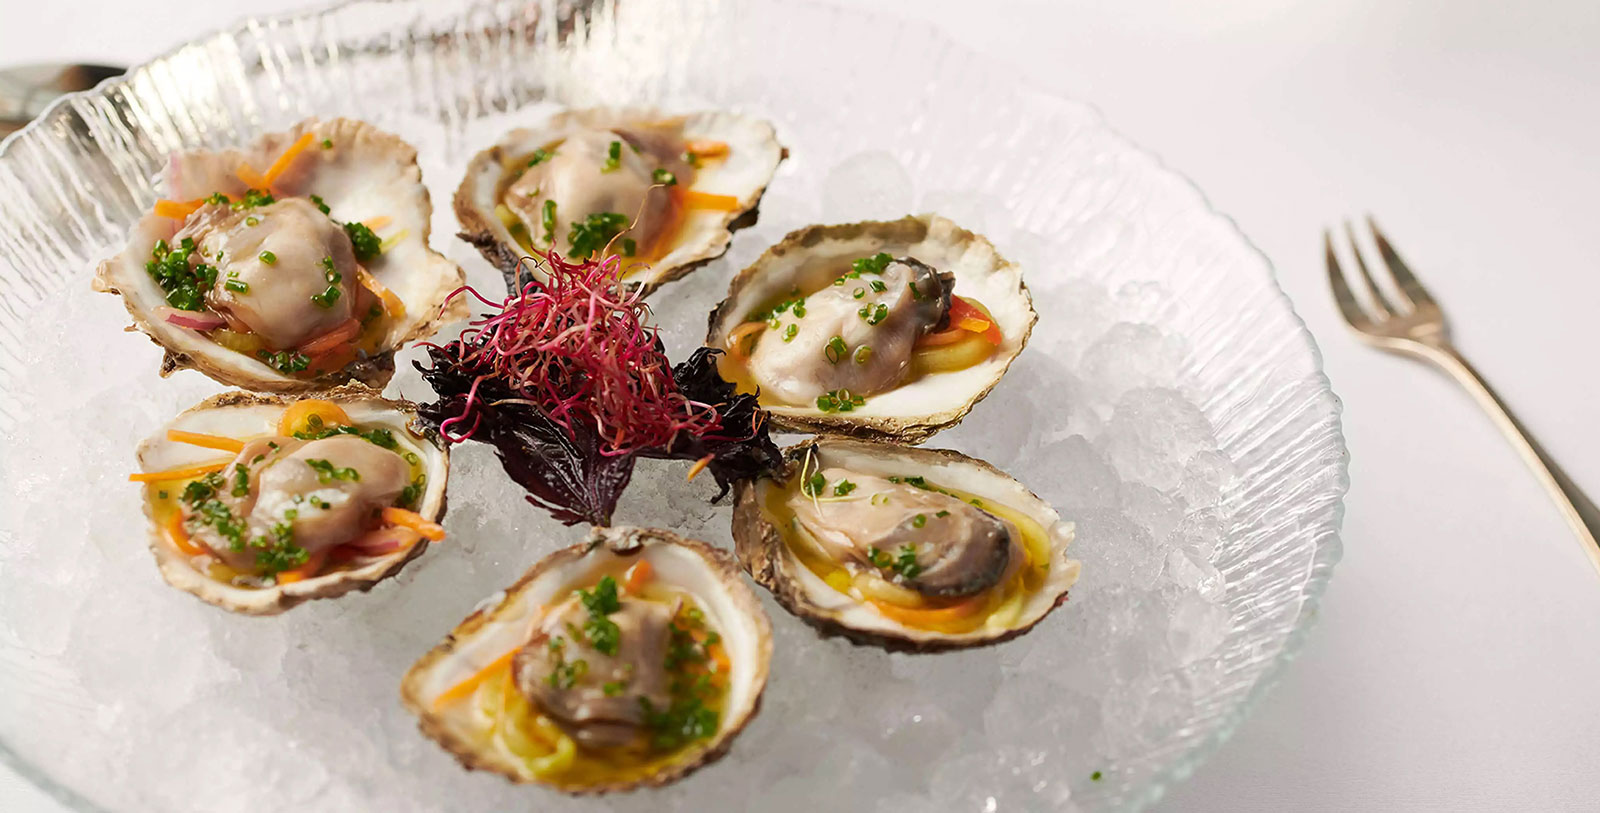 Taste the Kelly Galway Bay Rock Oysters at Dromoland's flagship restaurant, Earl of Thomond.